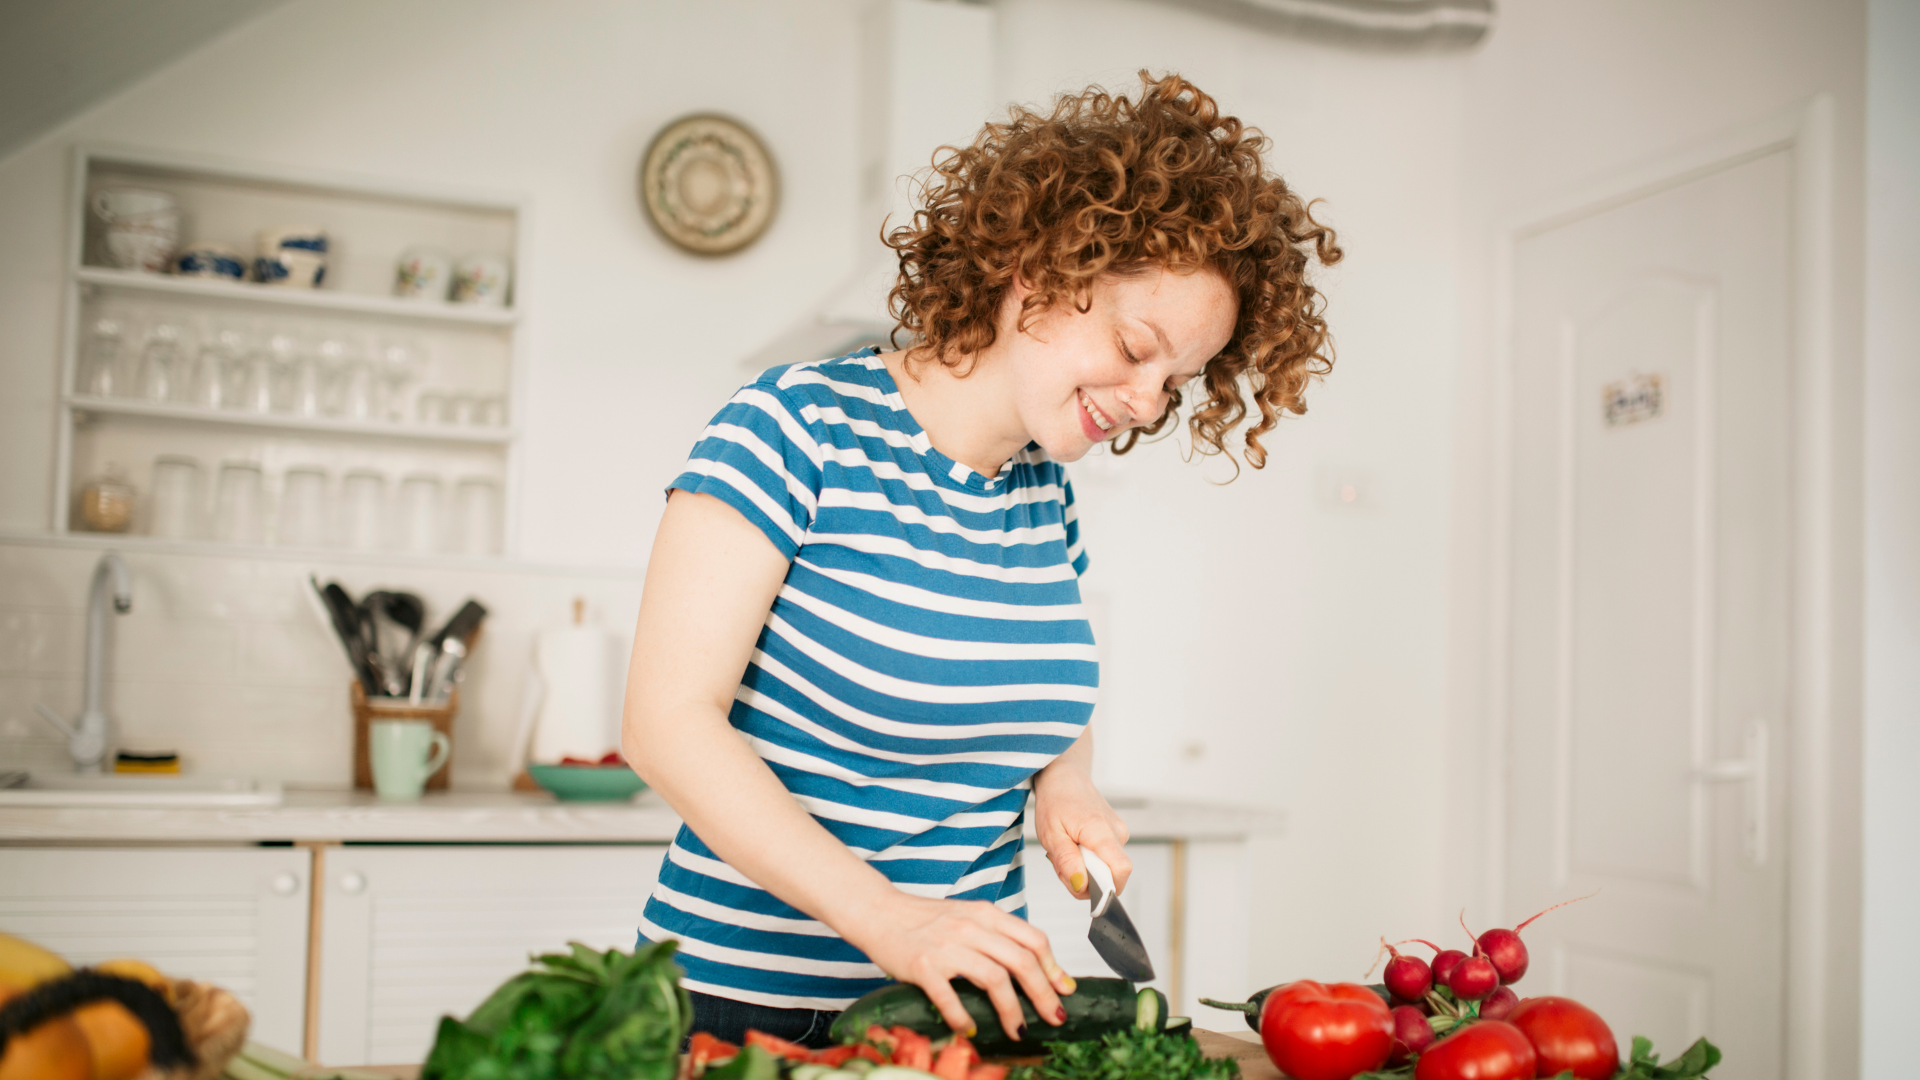 curly haired woman in blue striped shirt cutting vegetables